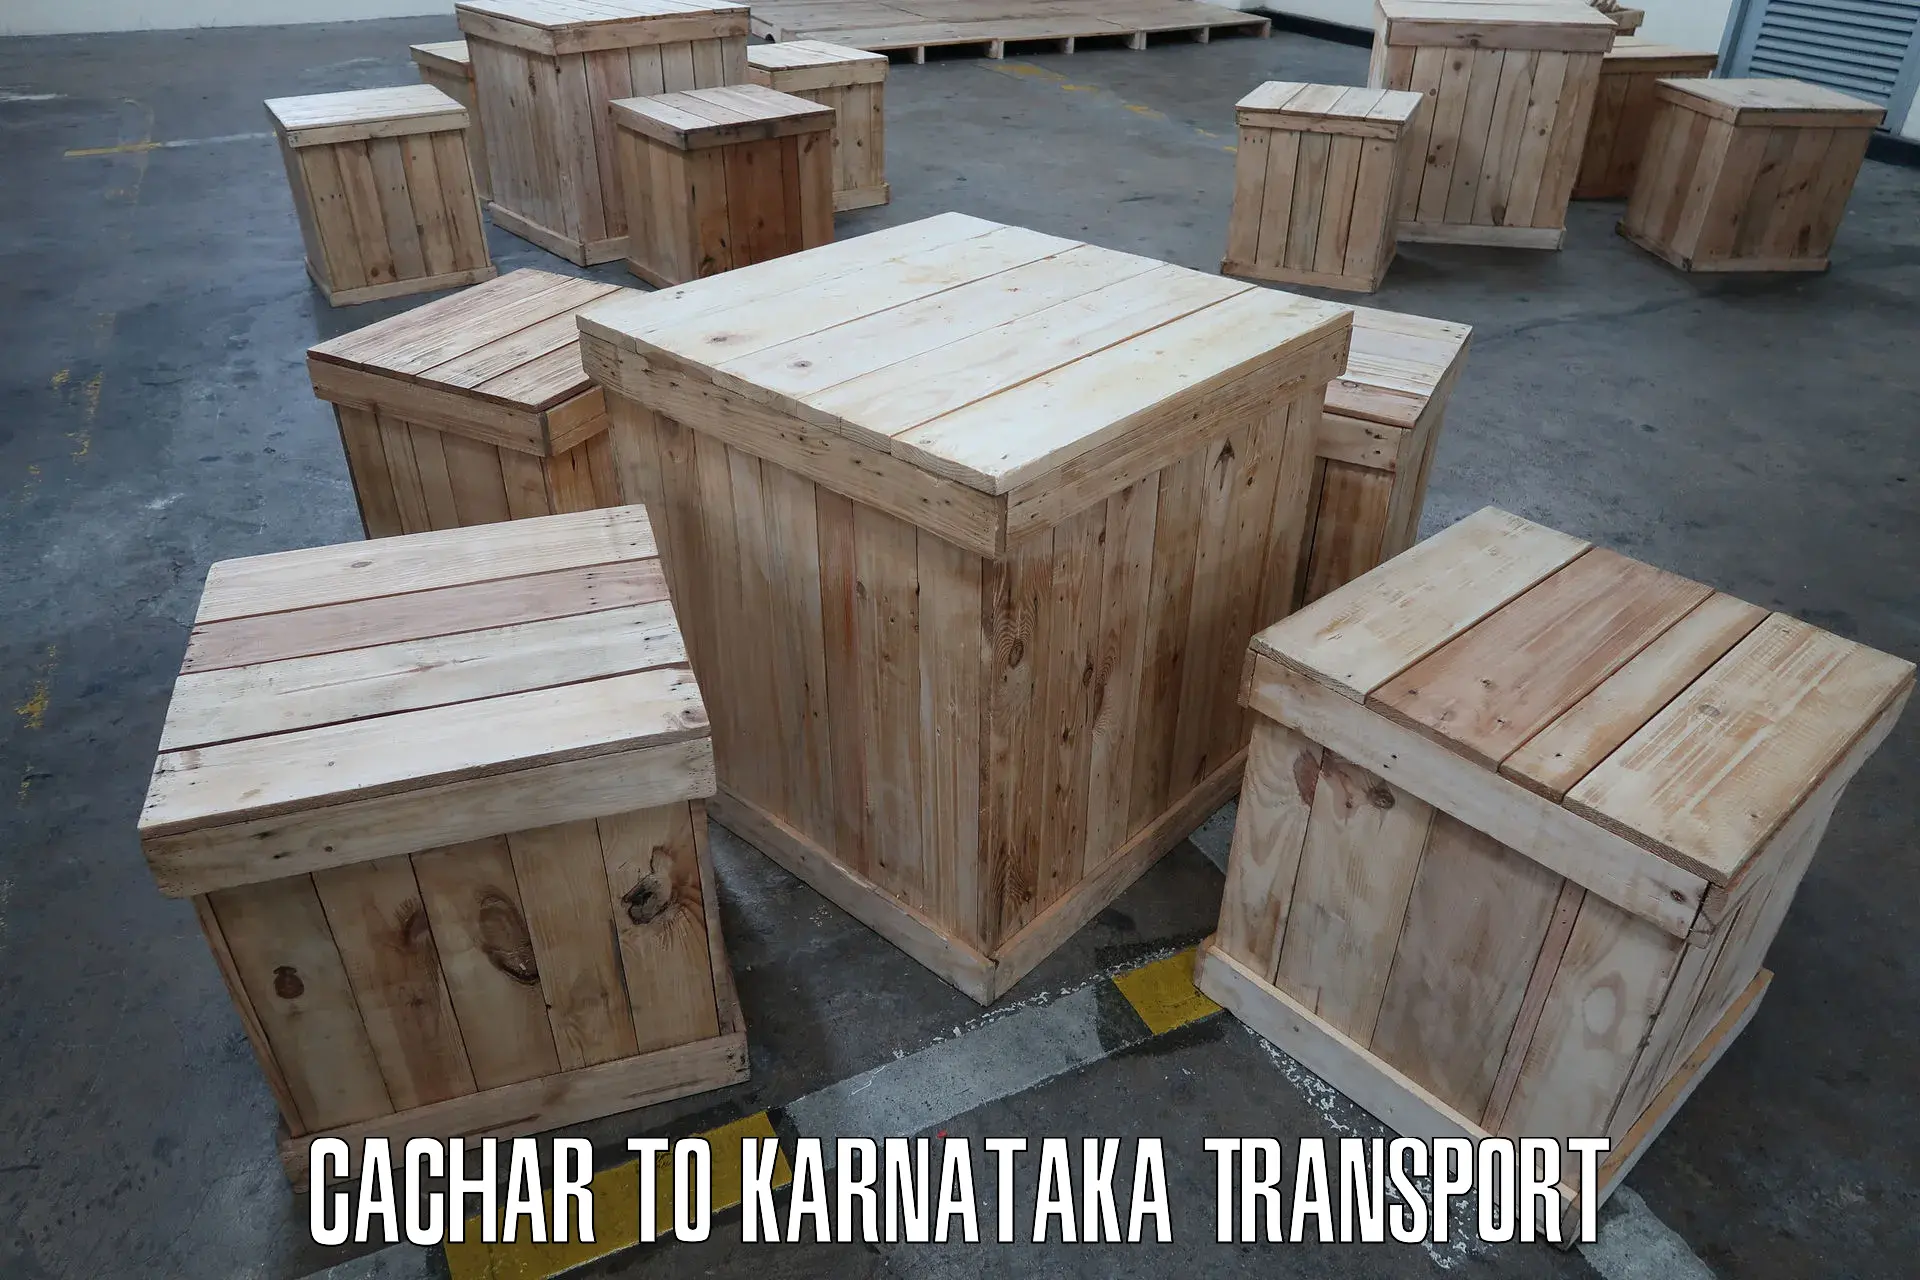 Truck transport companies in India in Cachar to Madikeri